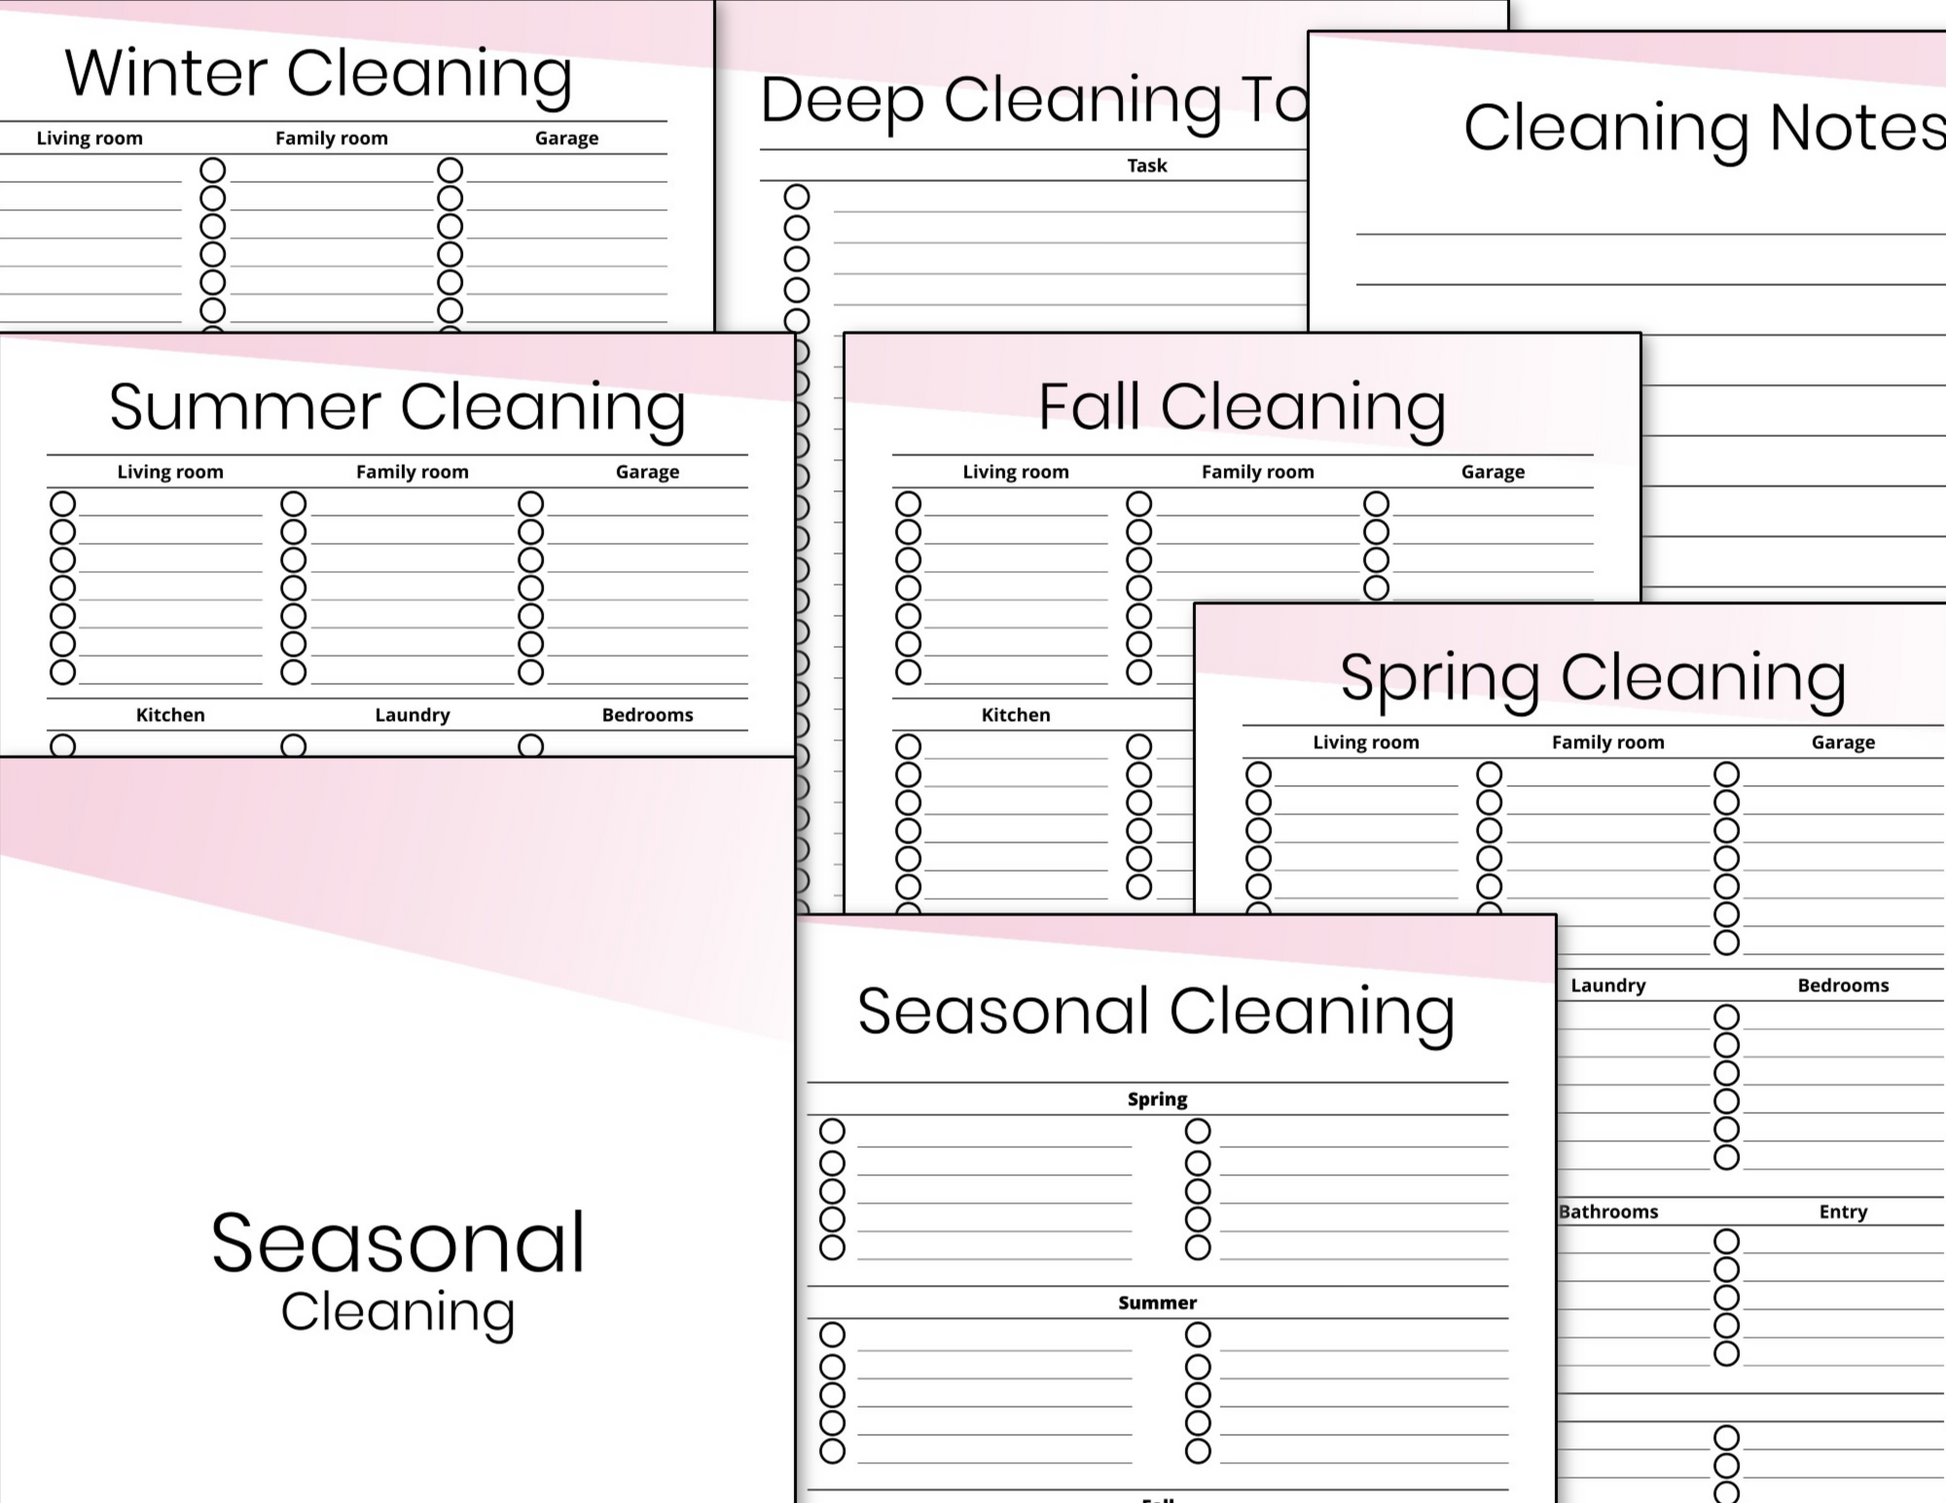 Assorted seasonal cleaning checklists in the Organized 31 Shop Cleaning Binder Fillable - Pink for organizing household tasks.